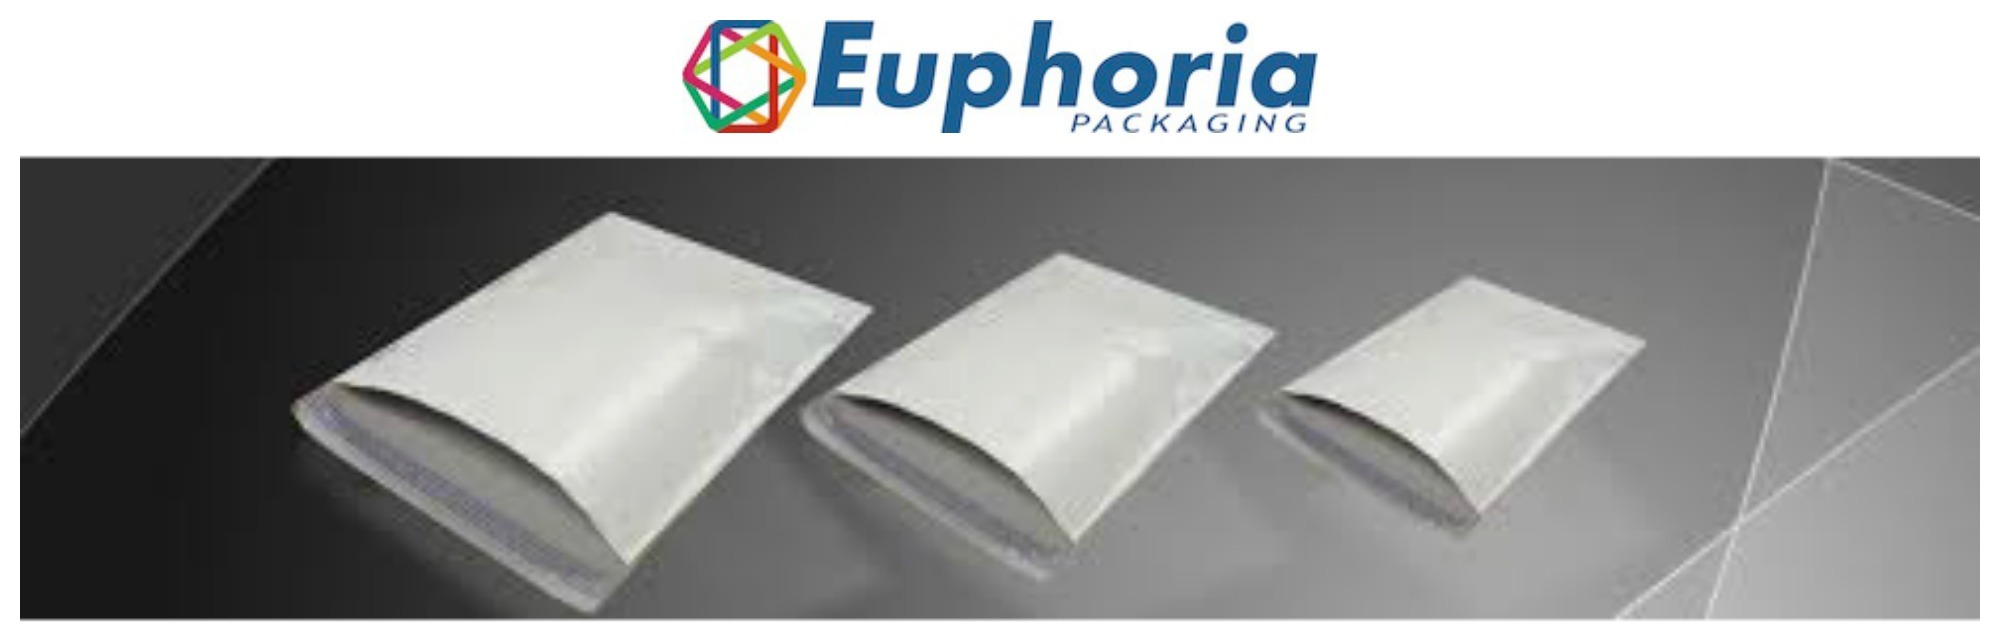 Air Bubble Packaging Bags